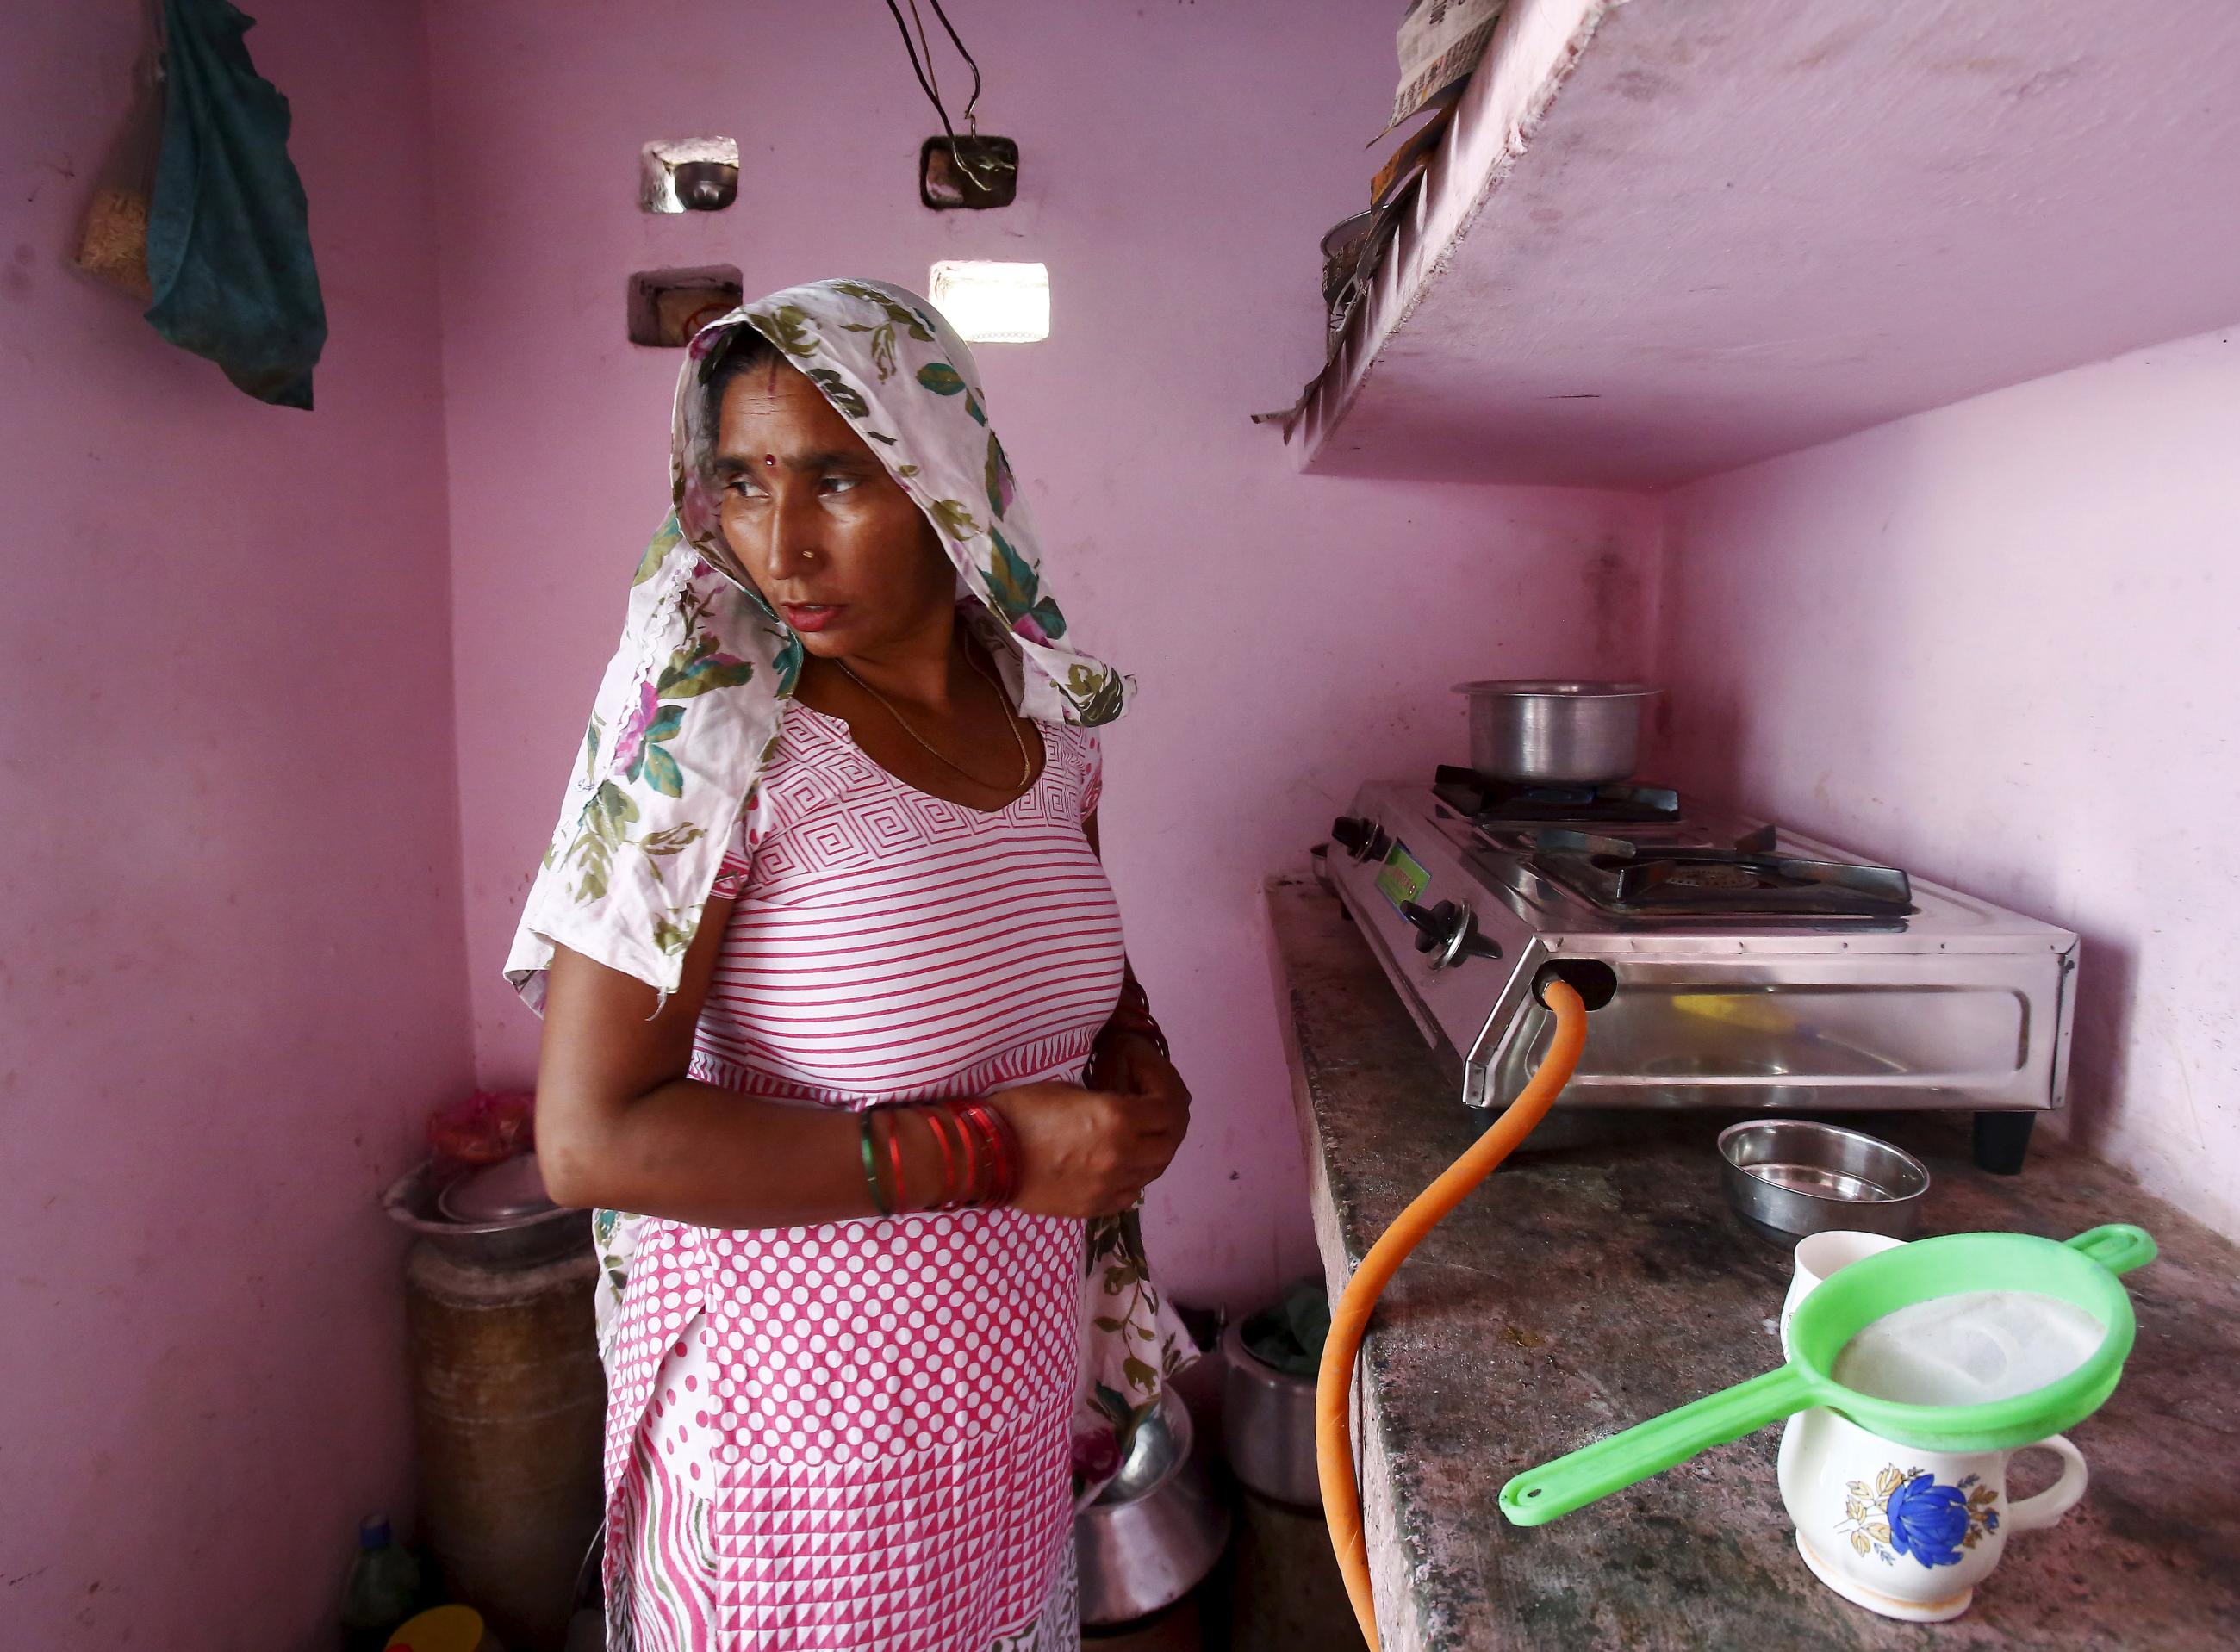 Munesh Nagar, a housewife, cooks on a stove using a Liquefied Petroleum Gas cylinder in her kitchen at Dujana village in Noida, on the outskirts of New Delhi October 7, 2015. 